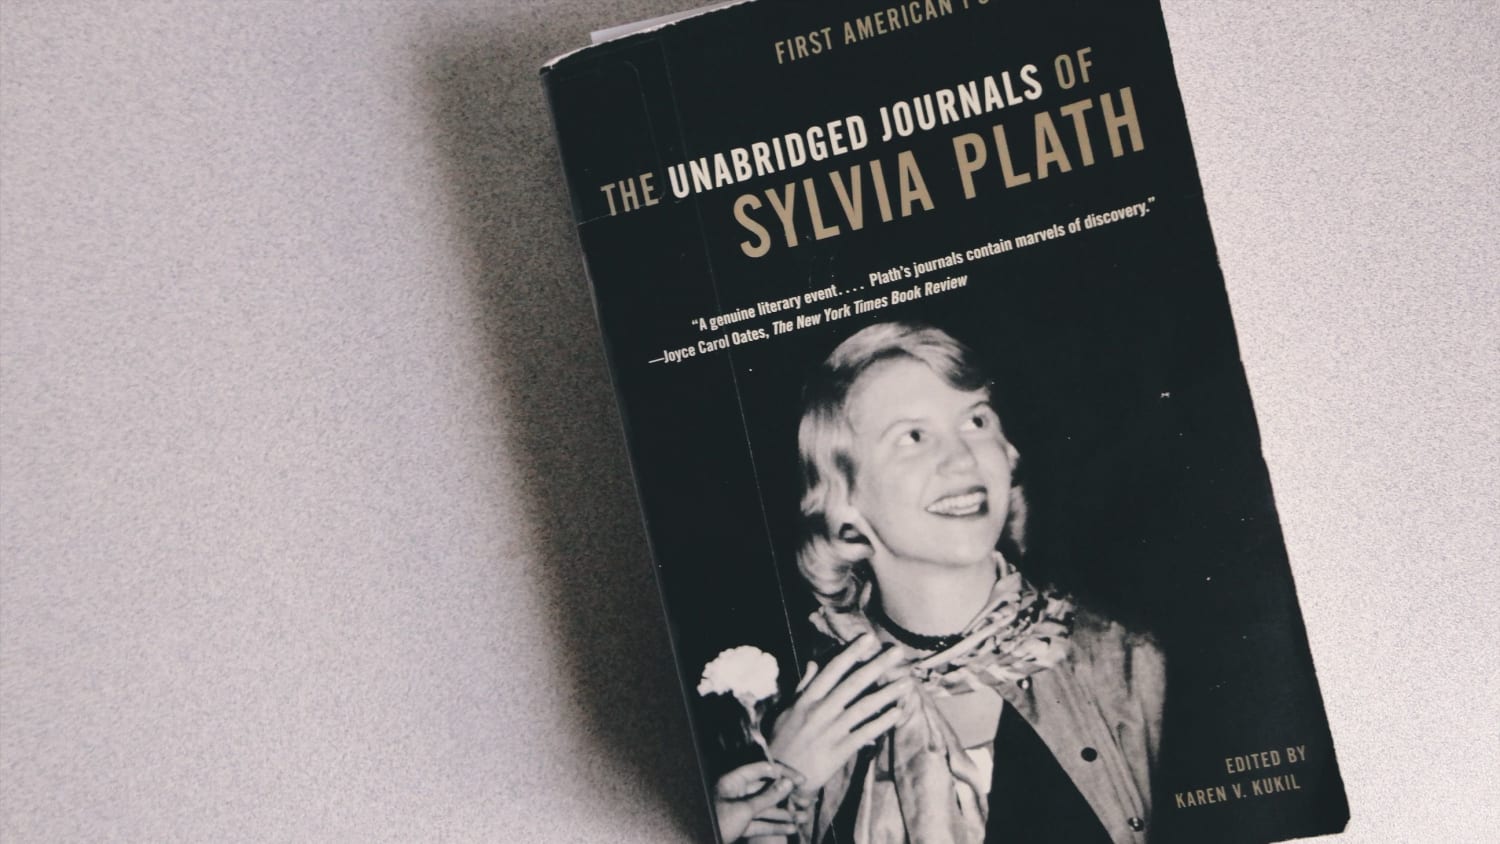 12 Things You Might Not Know About Sylvia Plath